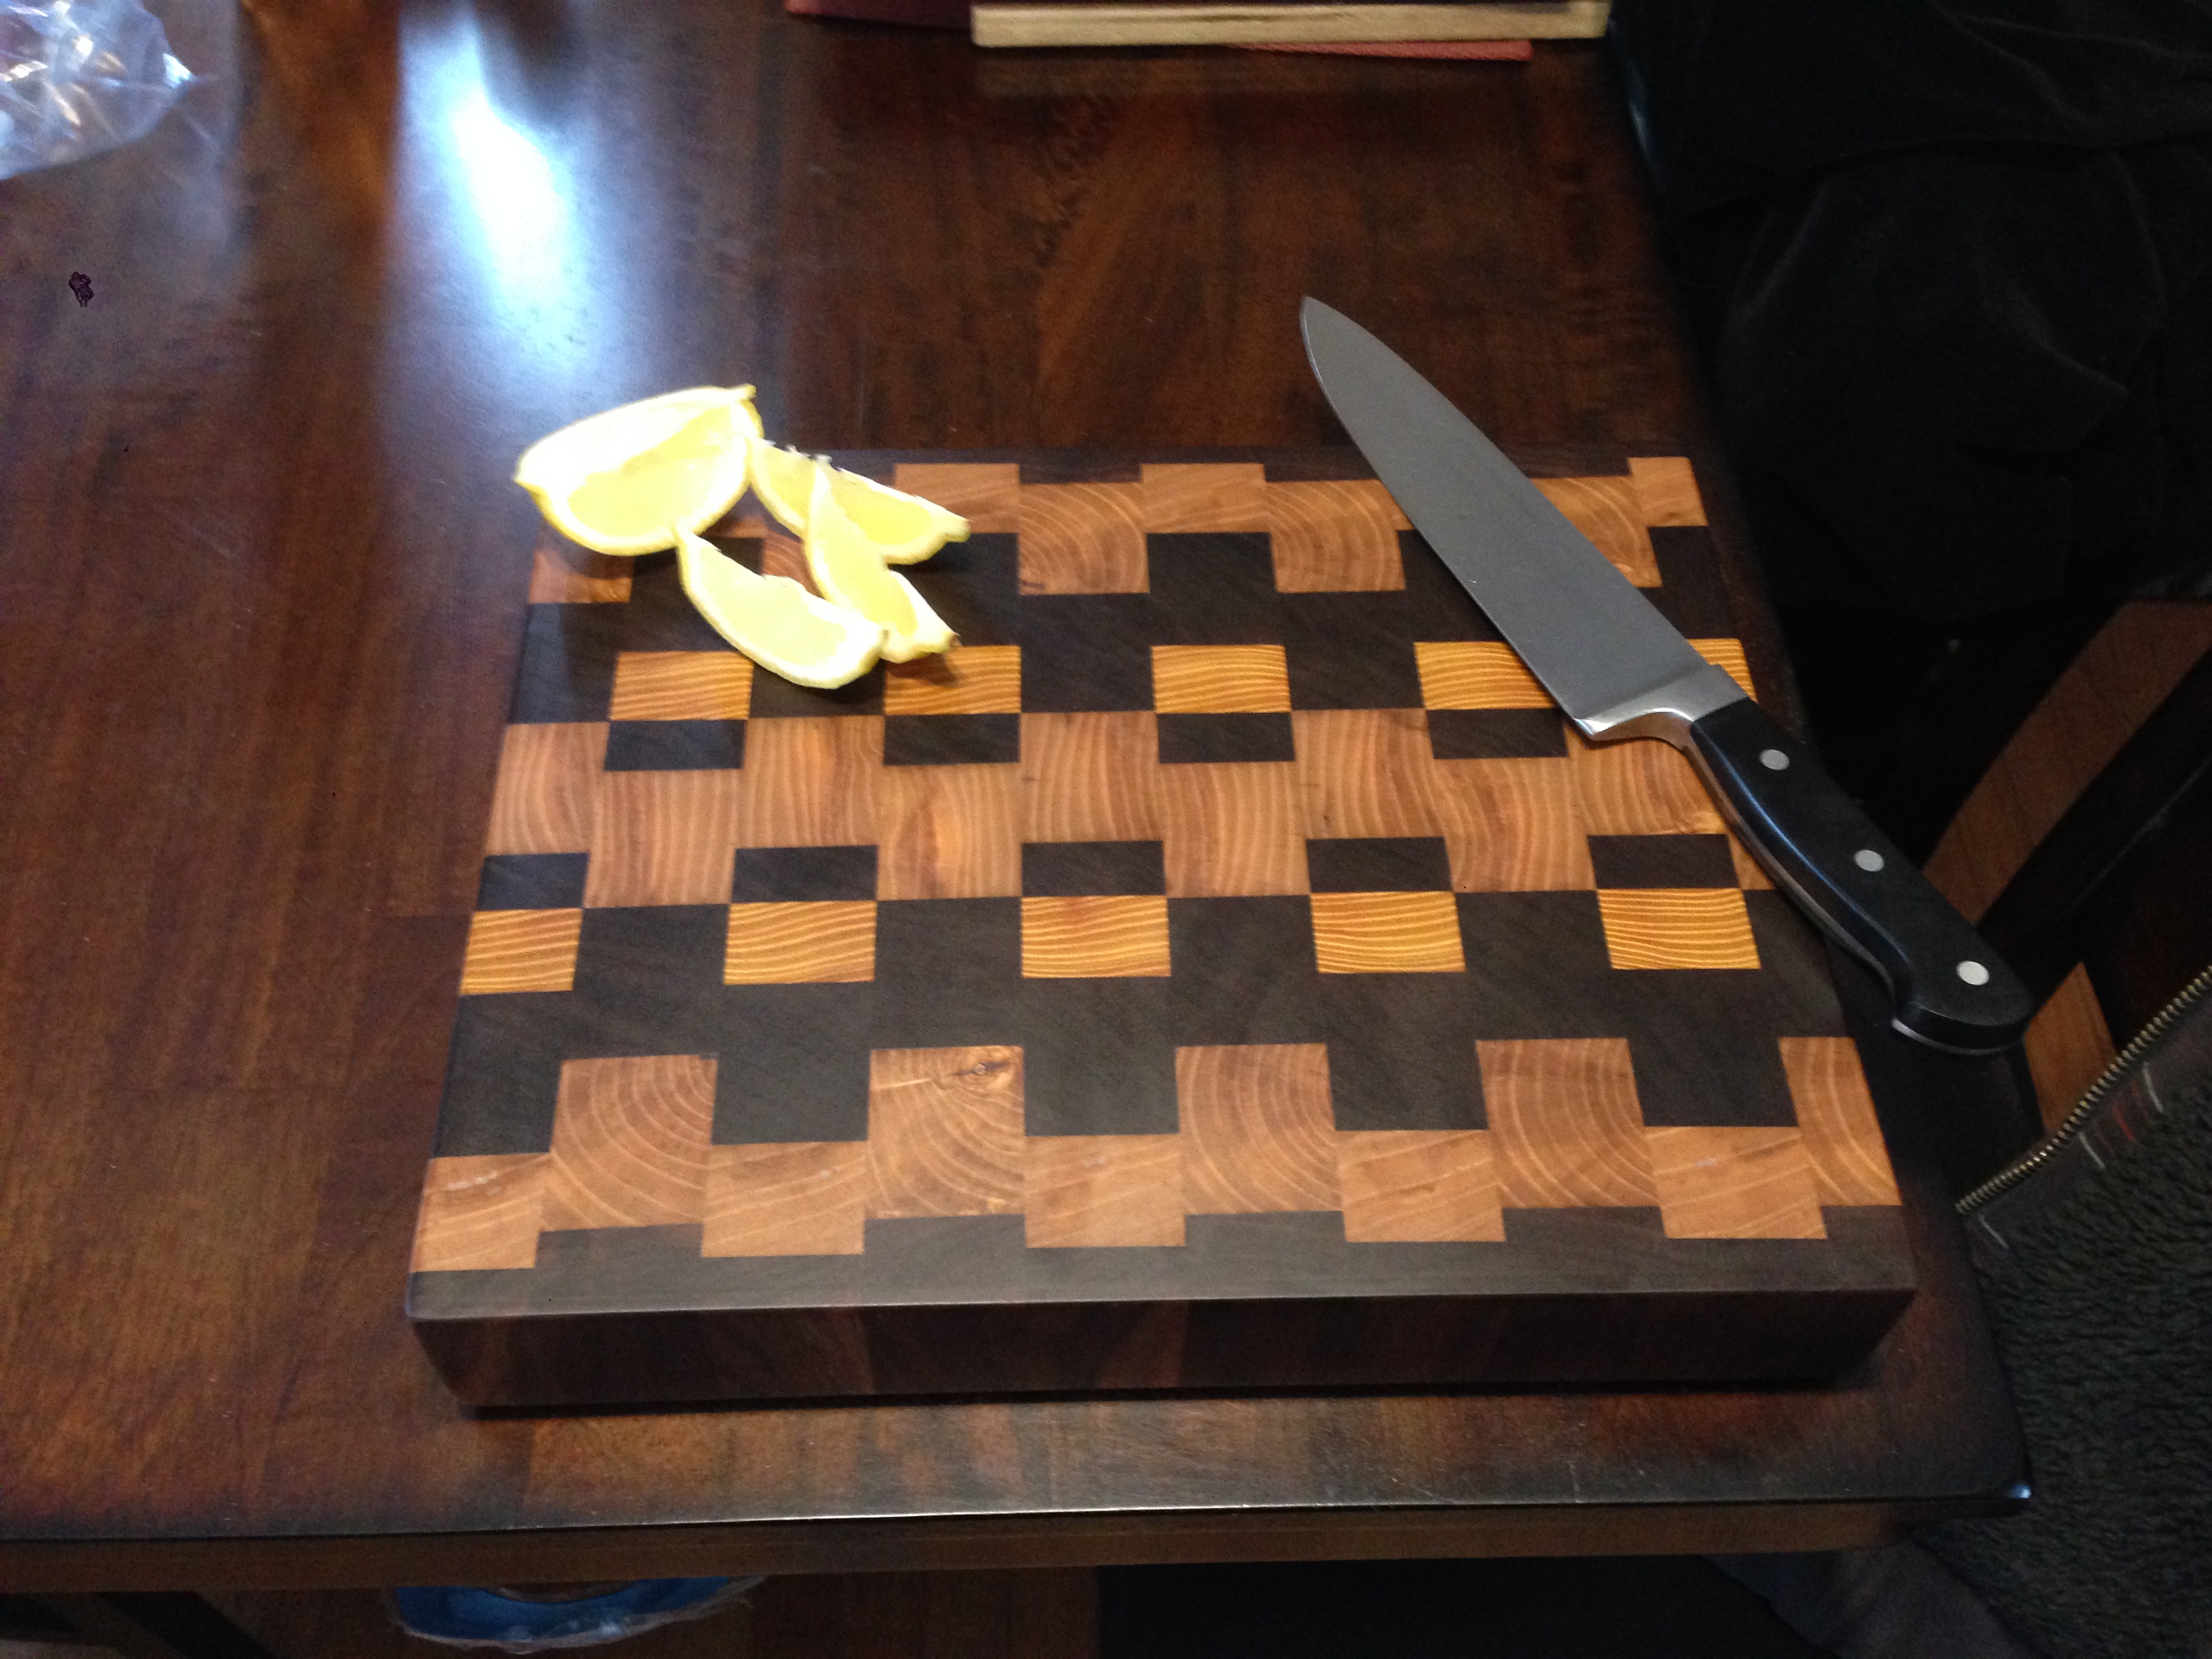 Ball kneading cuttingboard squeezing whipping then